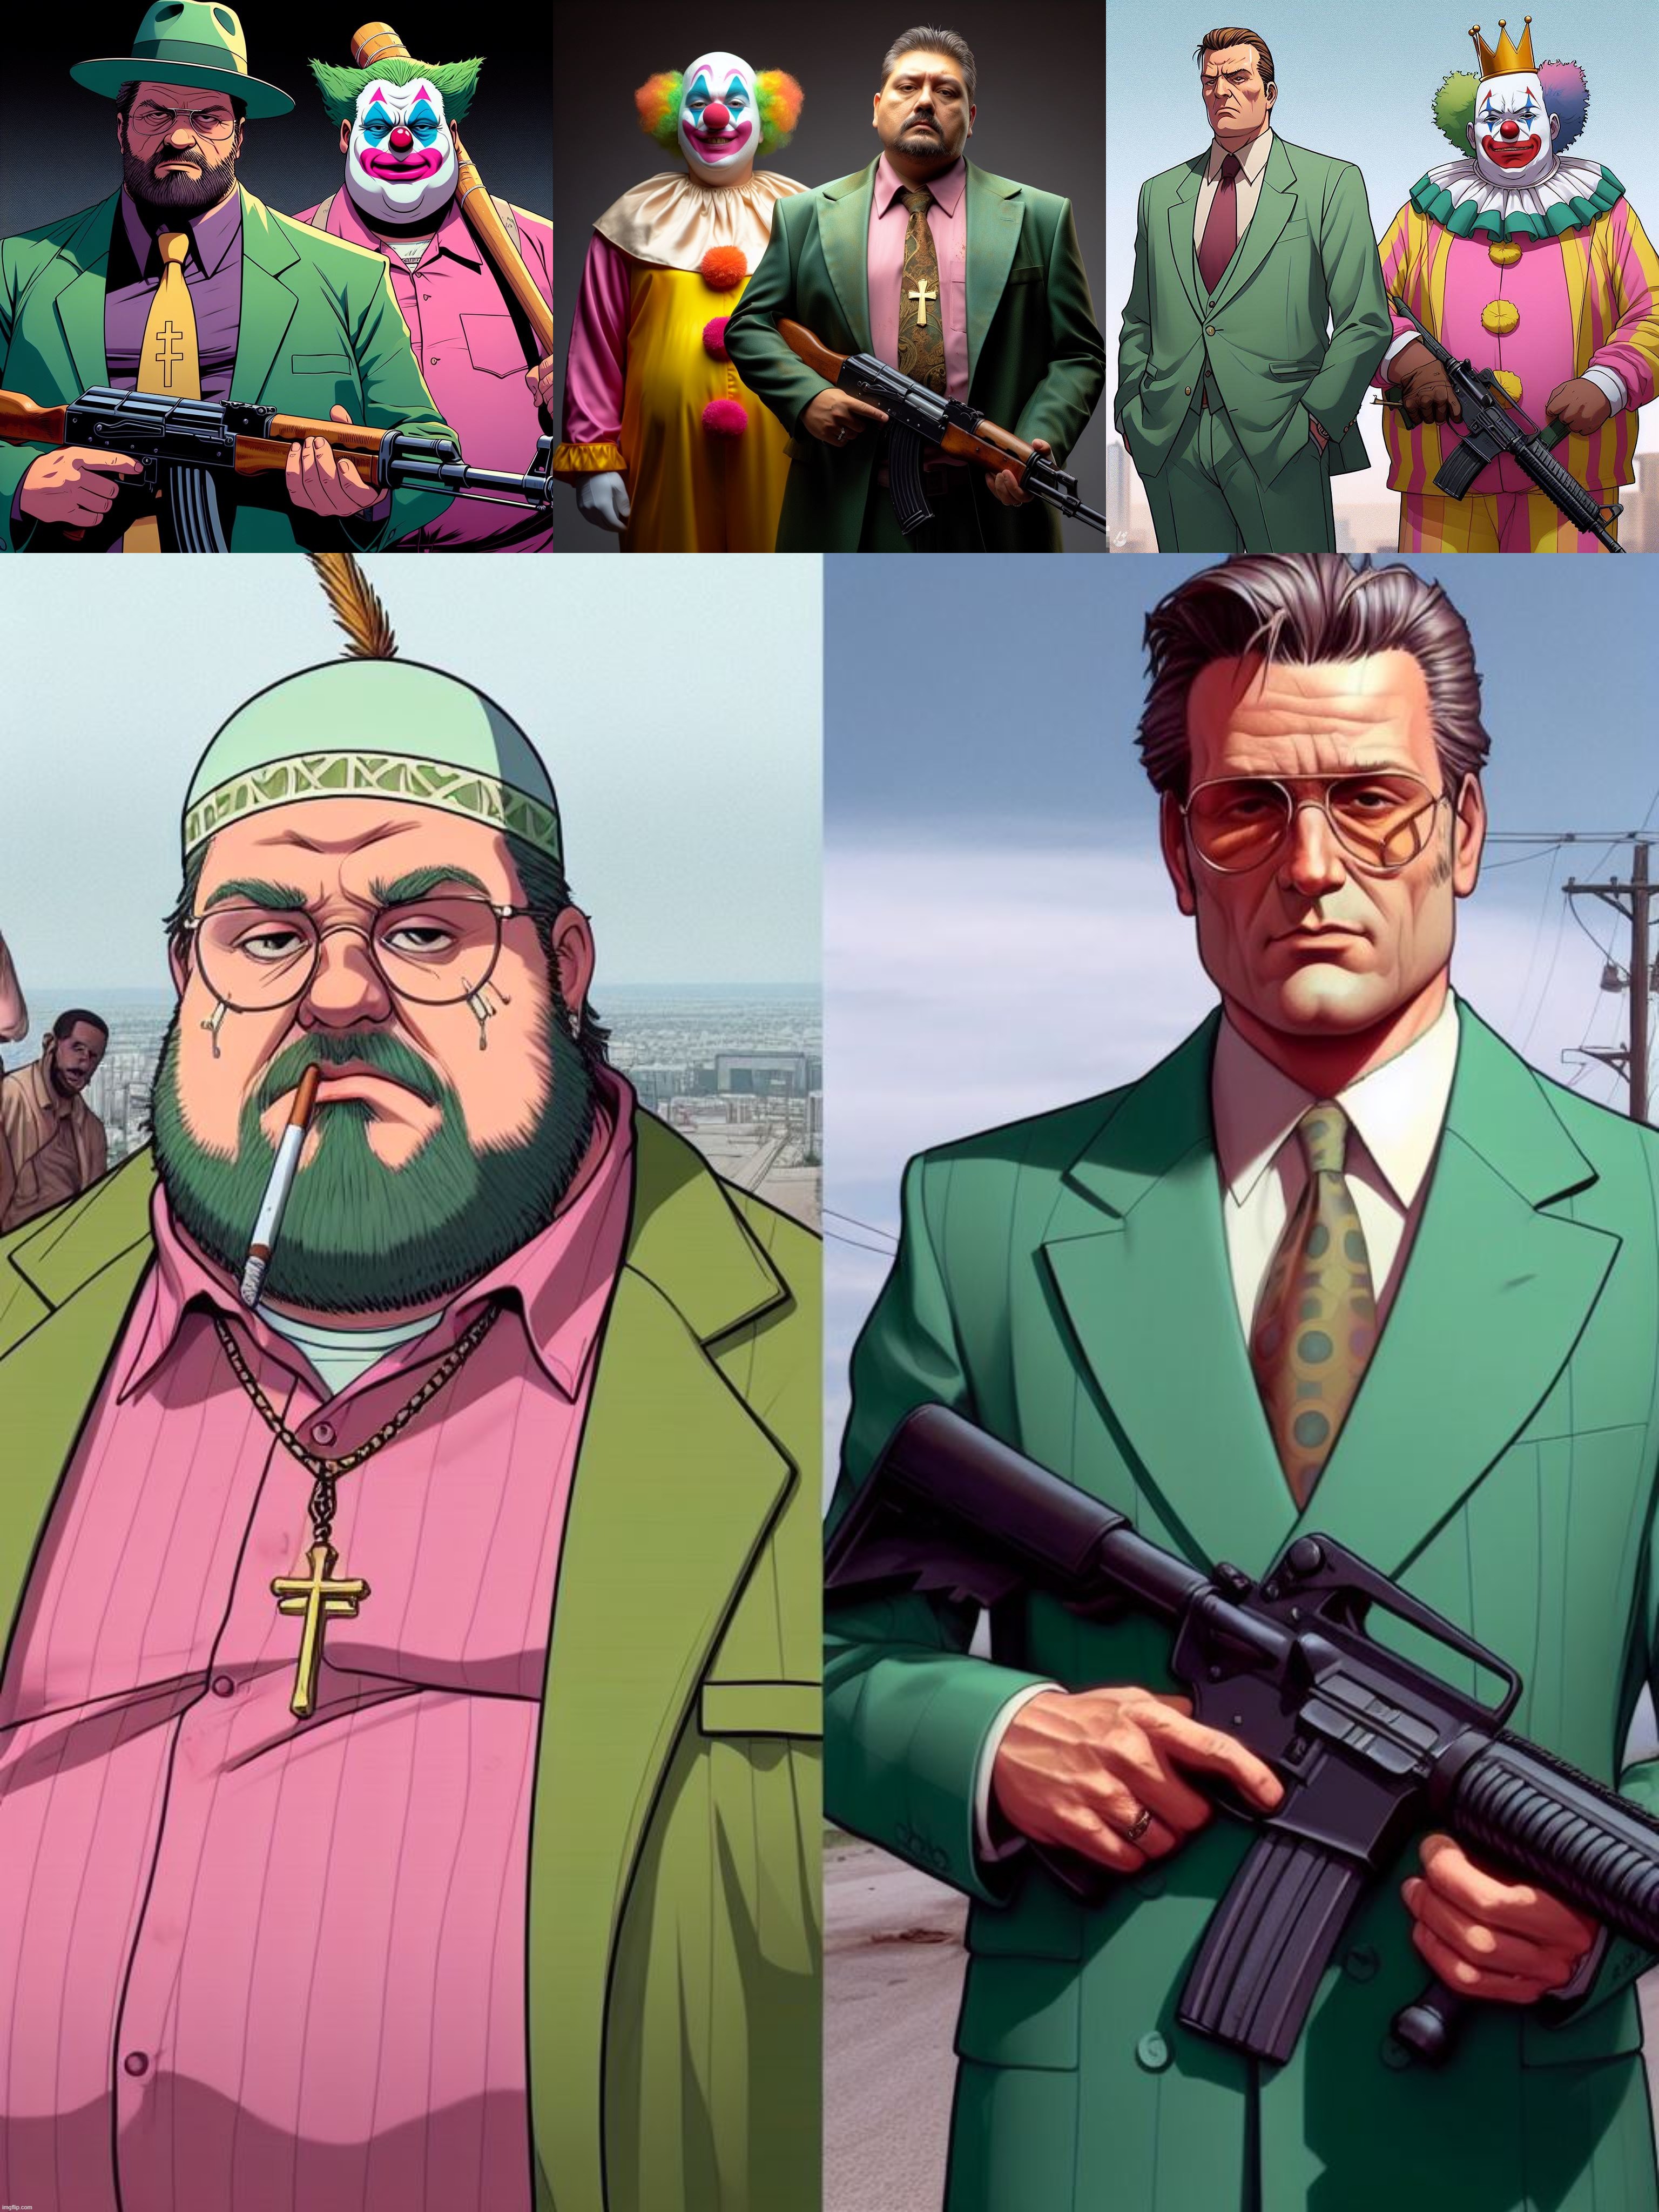 Ai Bing: My roommate's OCs described to AI. Religious Gangster and the clown who haunts him. Inspired by GTA, FF, and Resident E | image tagged in ai generated,clown,gangster,religious,grand theft auto,villain | made w/ Imgflip meme maker